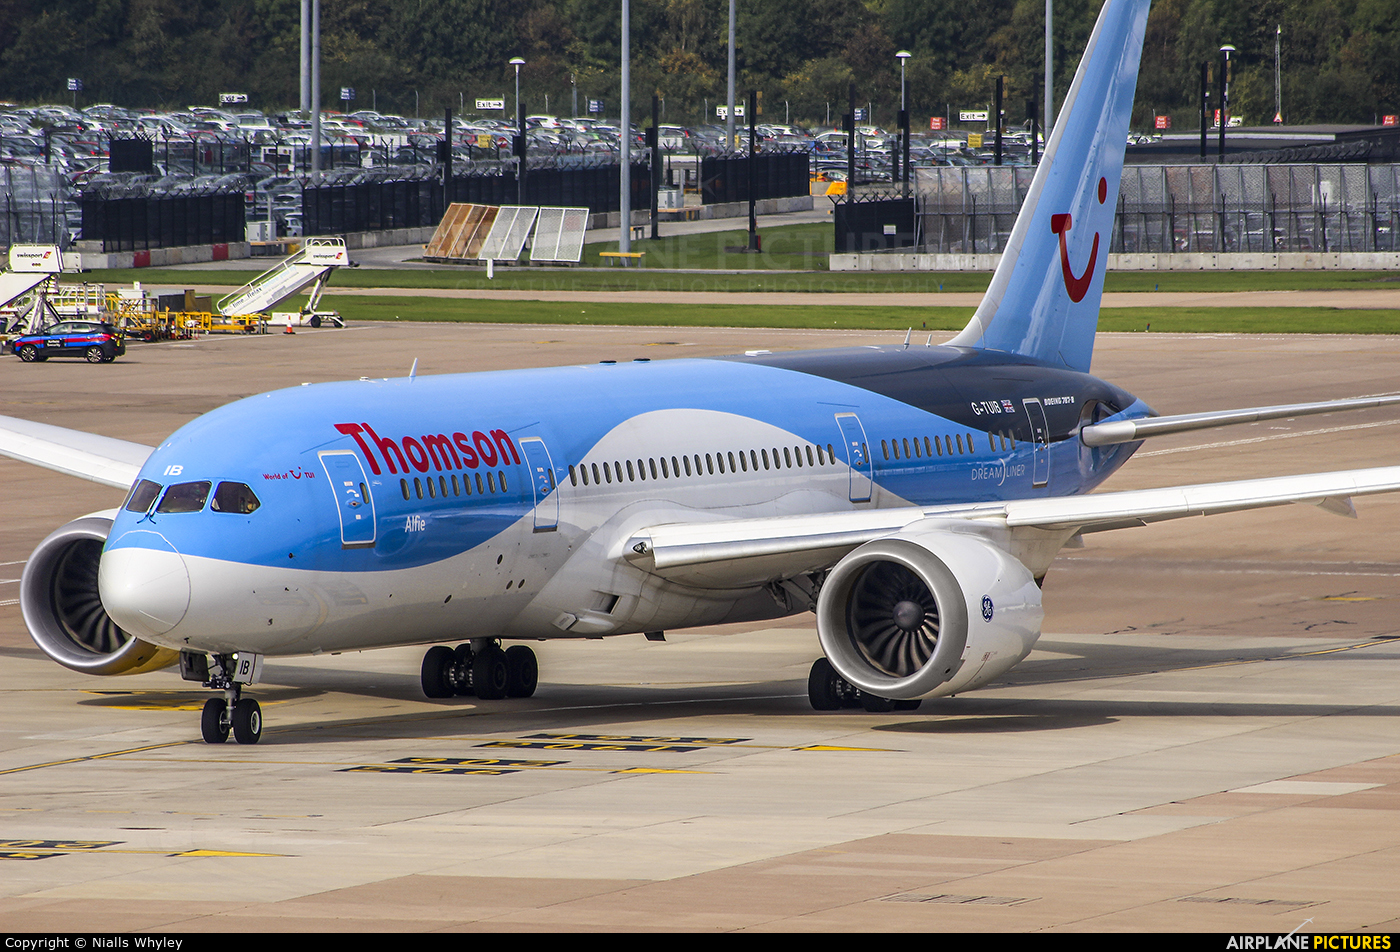 Thomson/Thomsonfly G-TUIB aircraft at Manchester